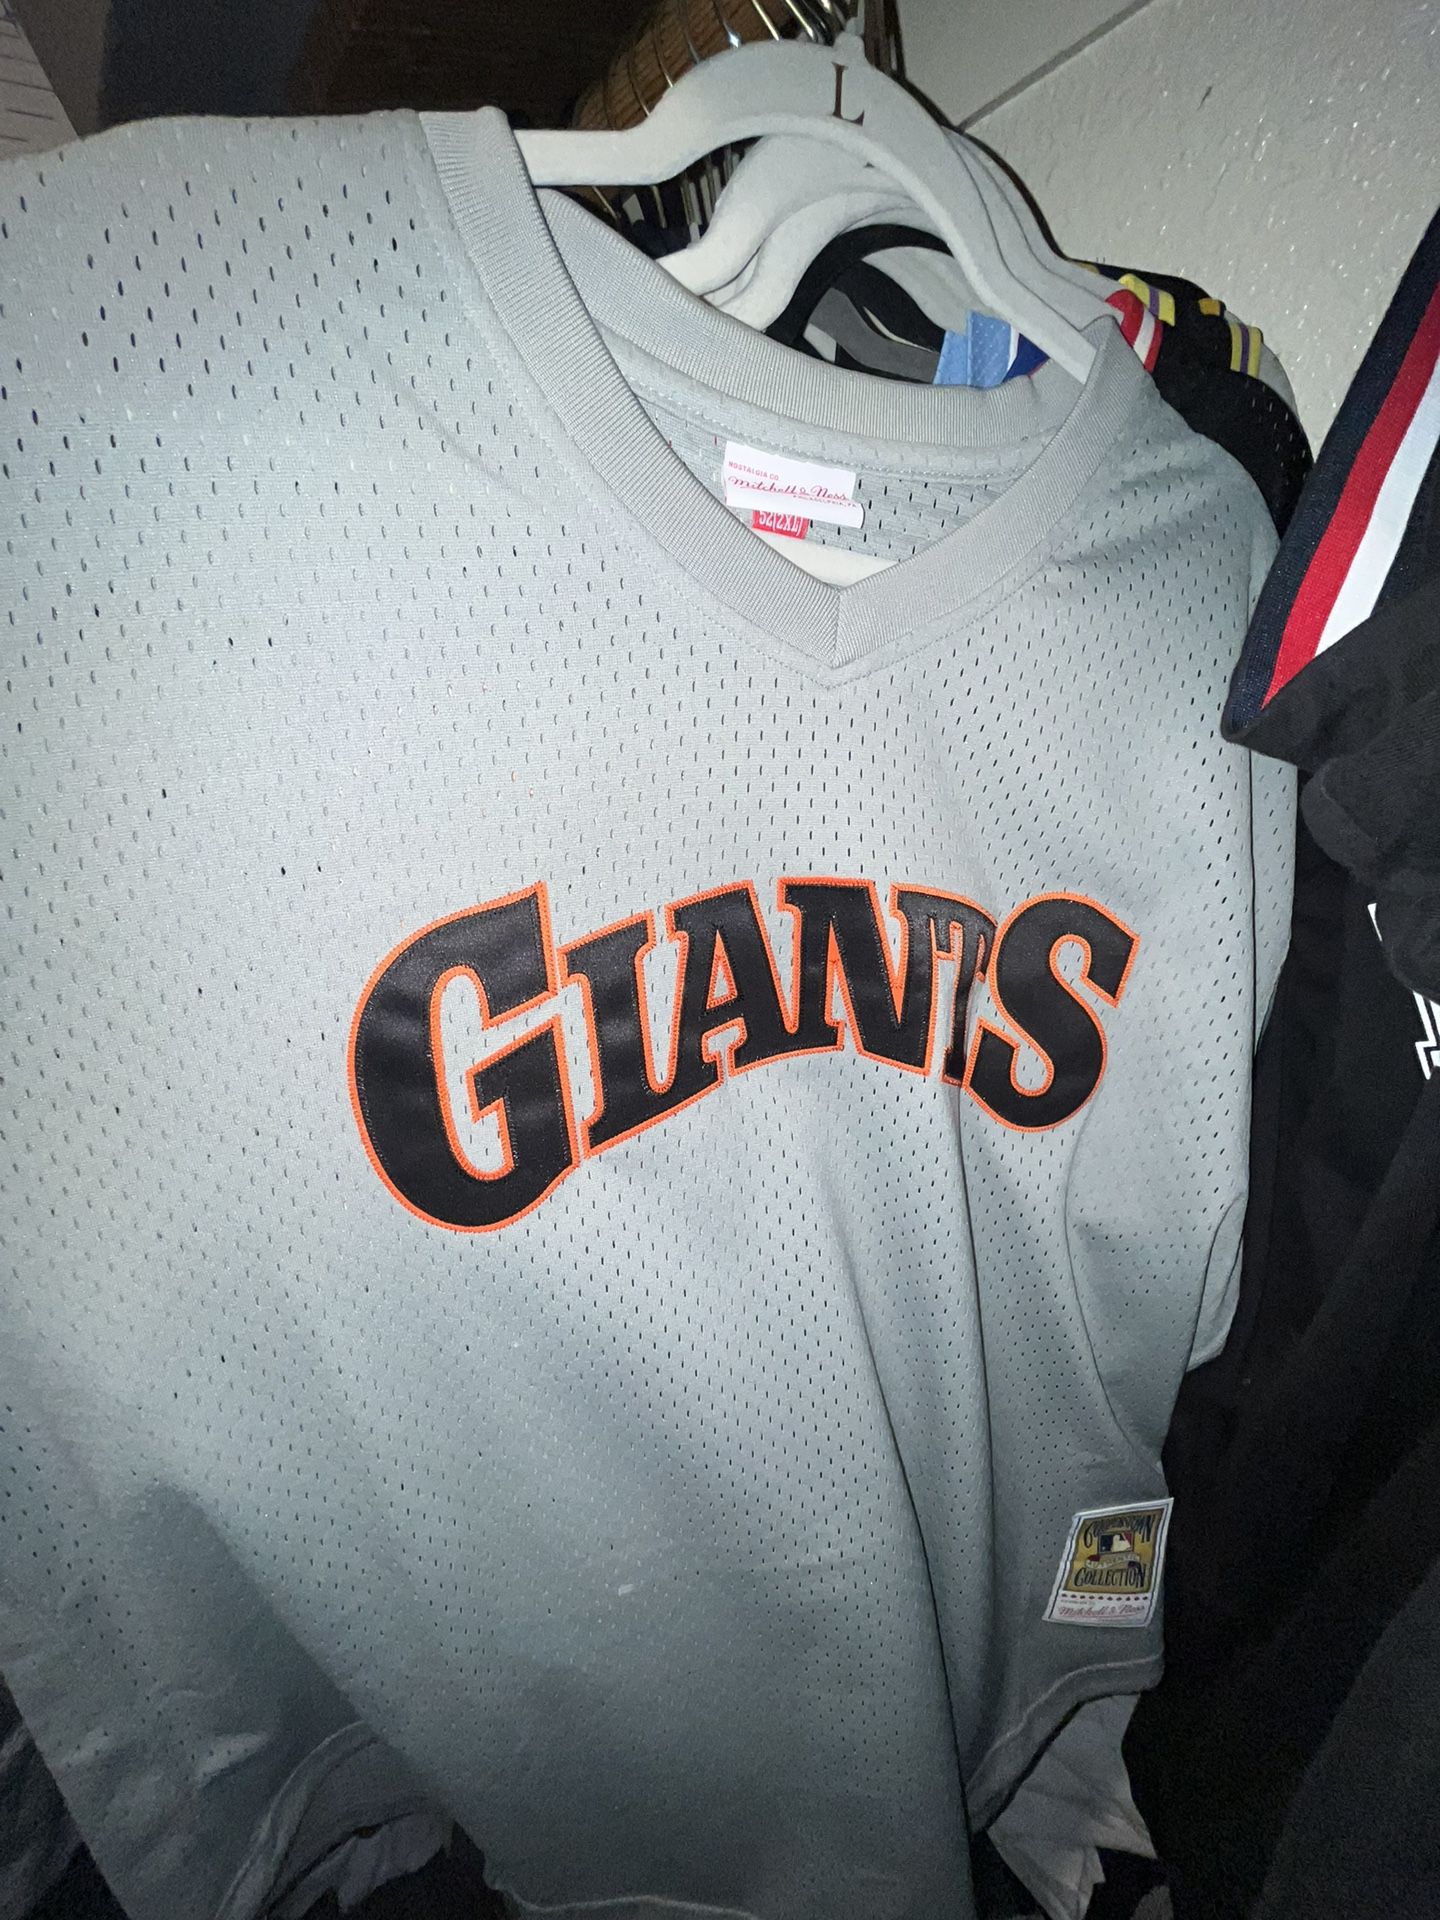 Pink Giants jersey for Sale in San Jose, CA - OfferUp